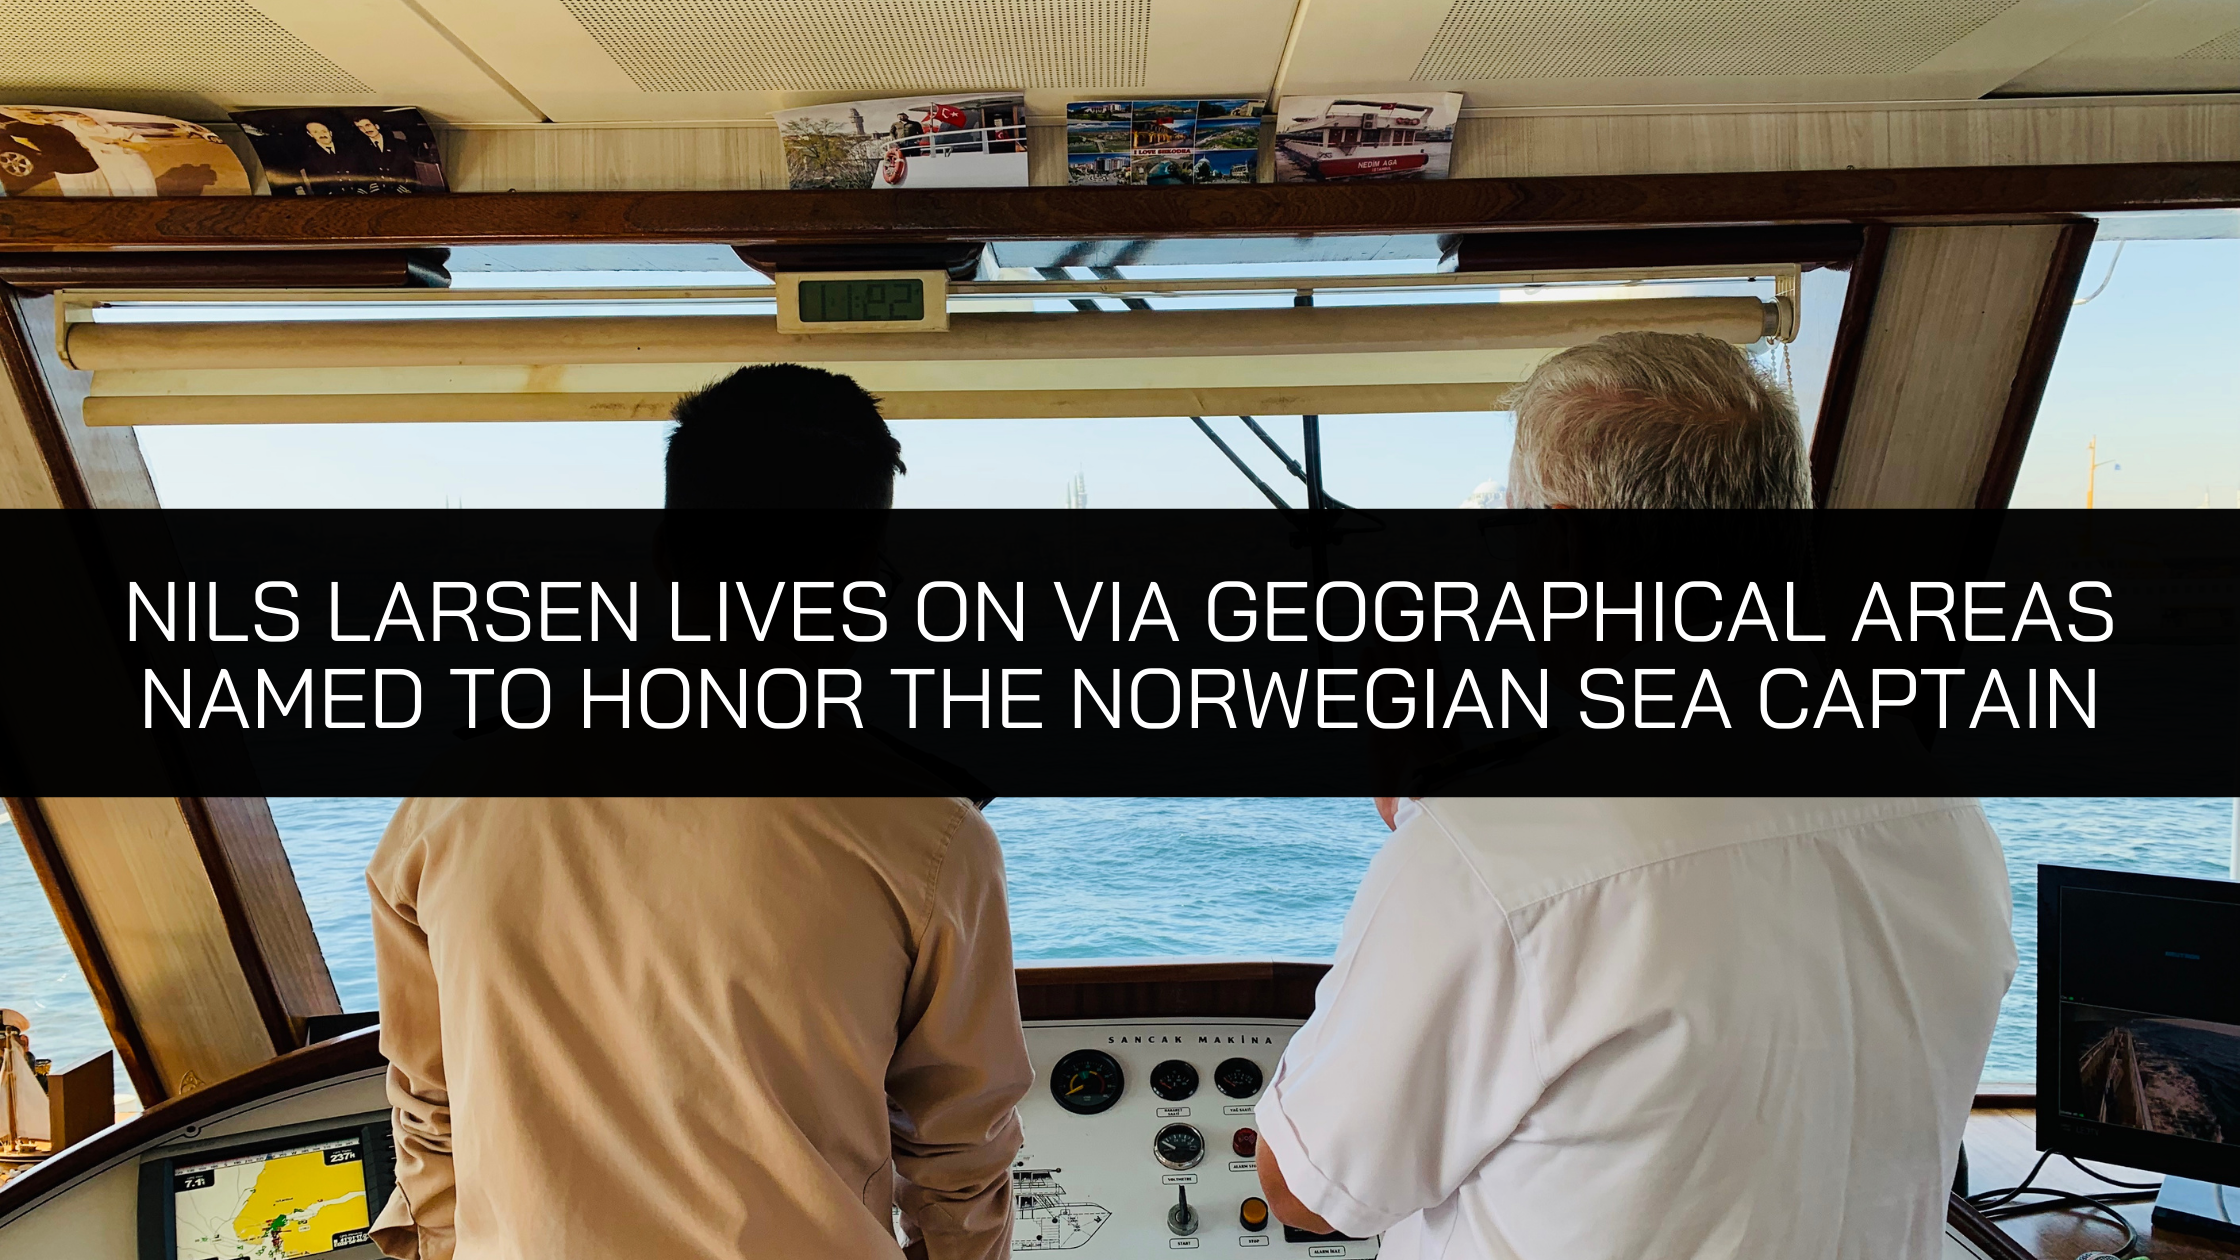 Nils Larsen Lives on via Geographical Areas Named to Honor the Norwegian Sea Captain